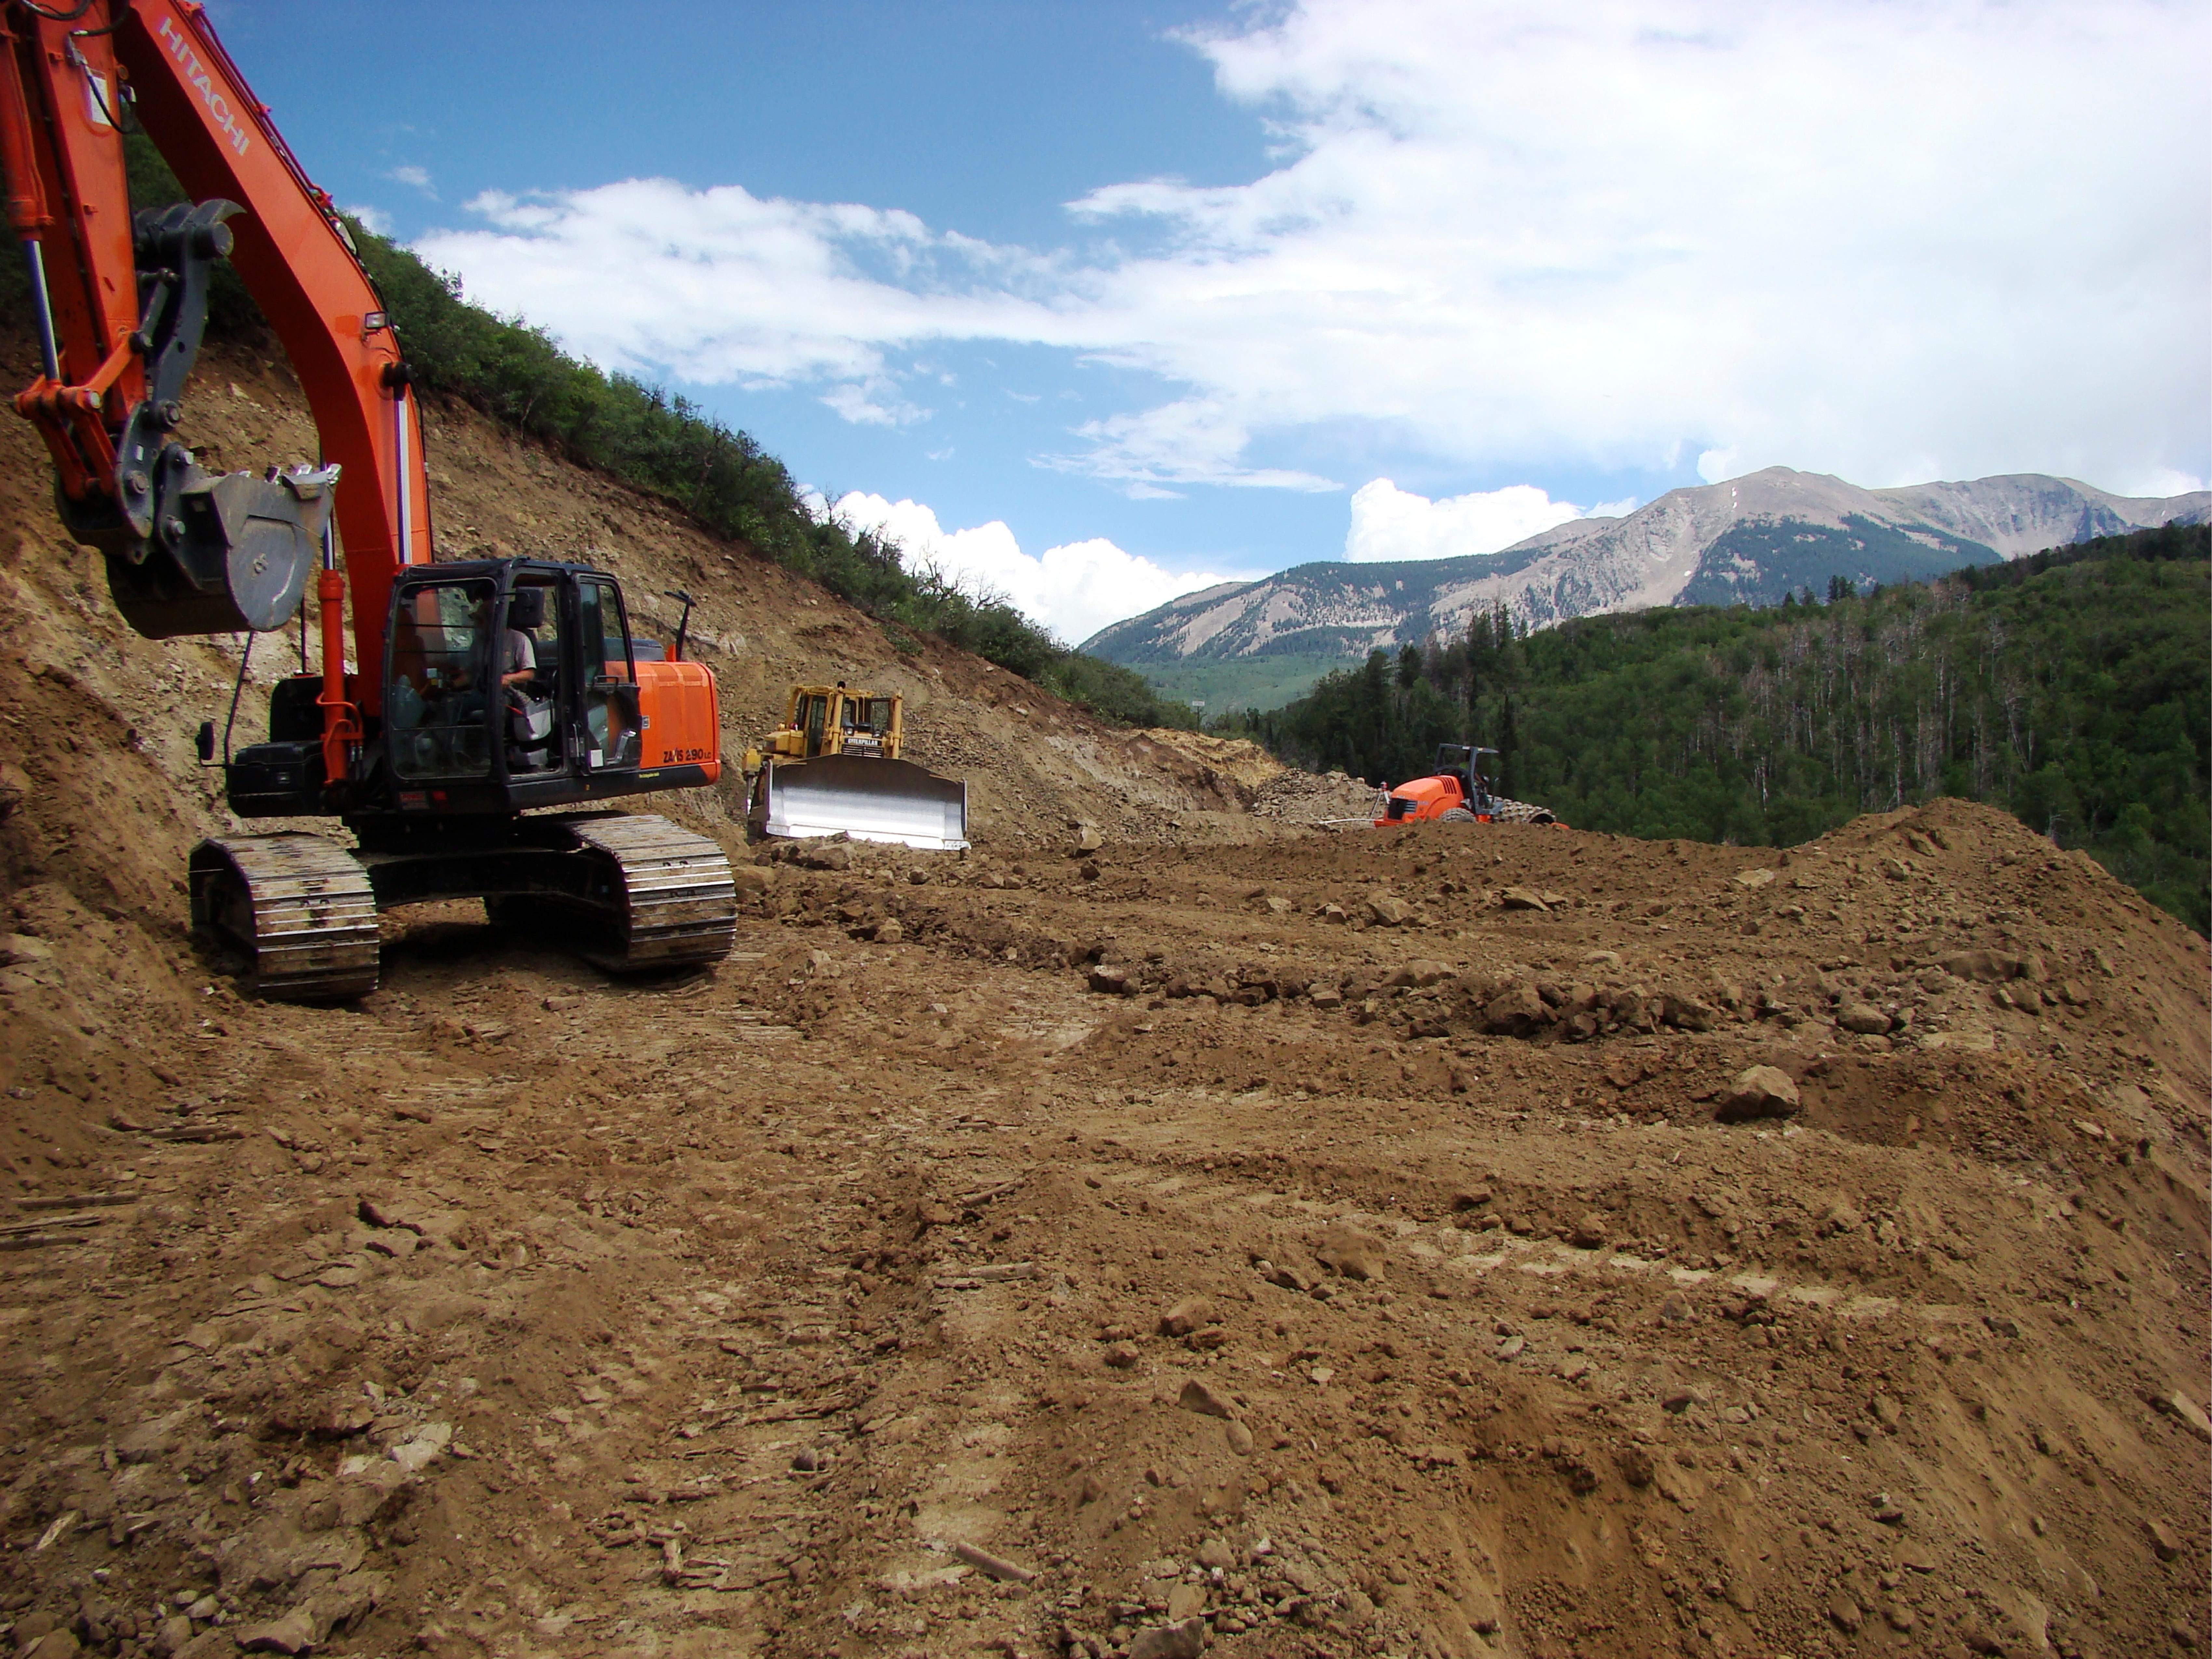 Construction of road and methane venting pad above the West Elk coal mine.
(U.S. Forest Service Photo)